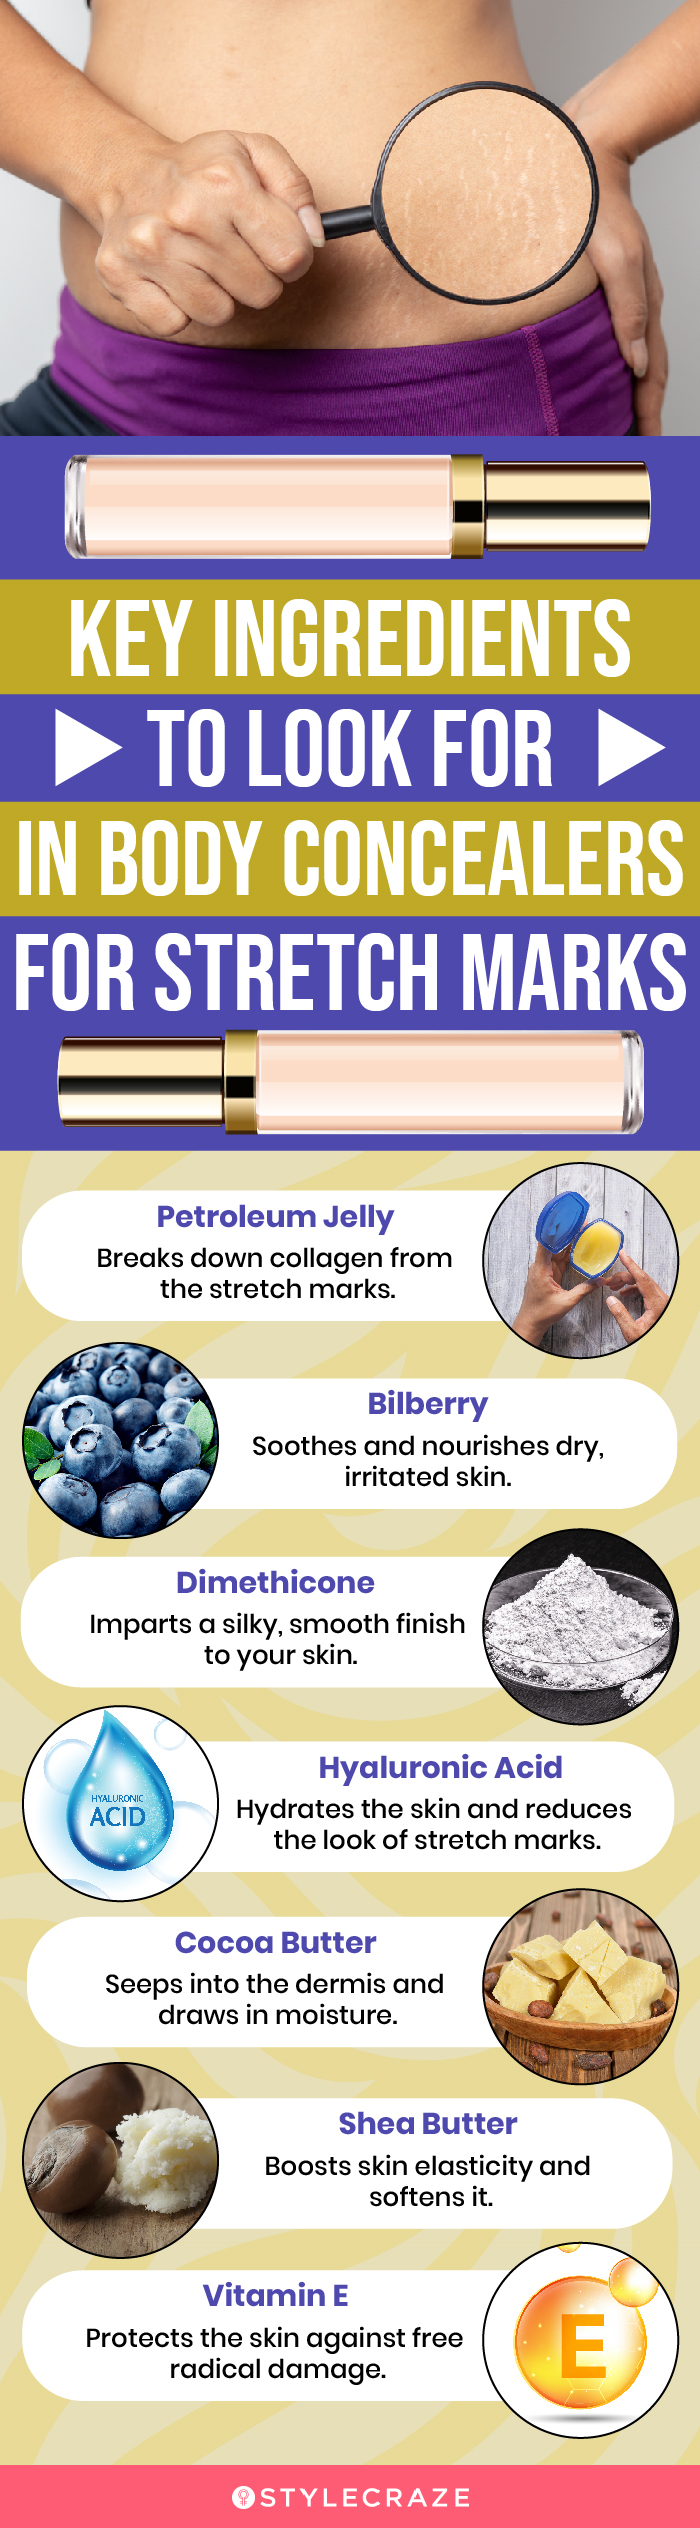 Key Ingredients To Look For In Body Concealers For Stretch Marks (infographic)